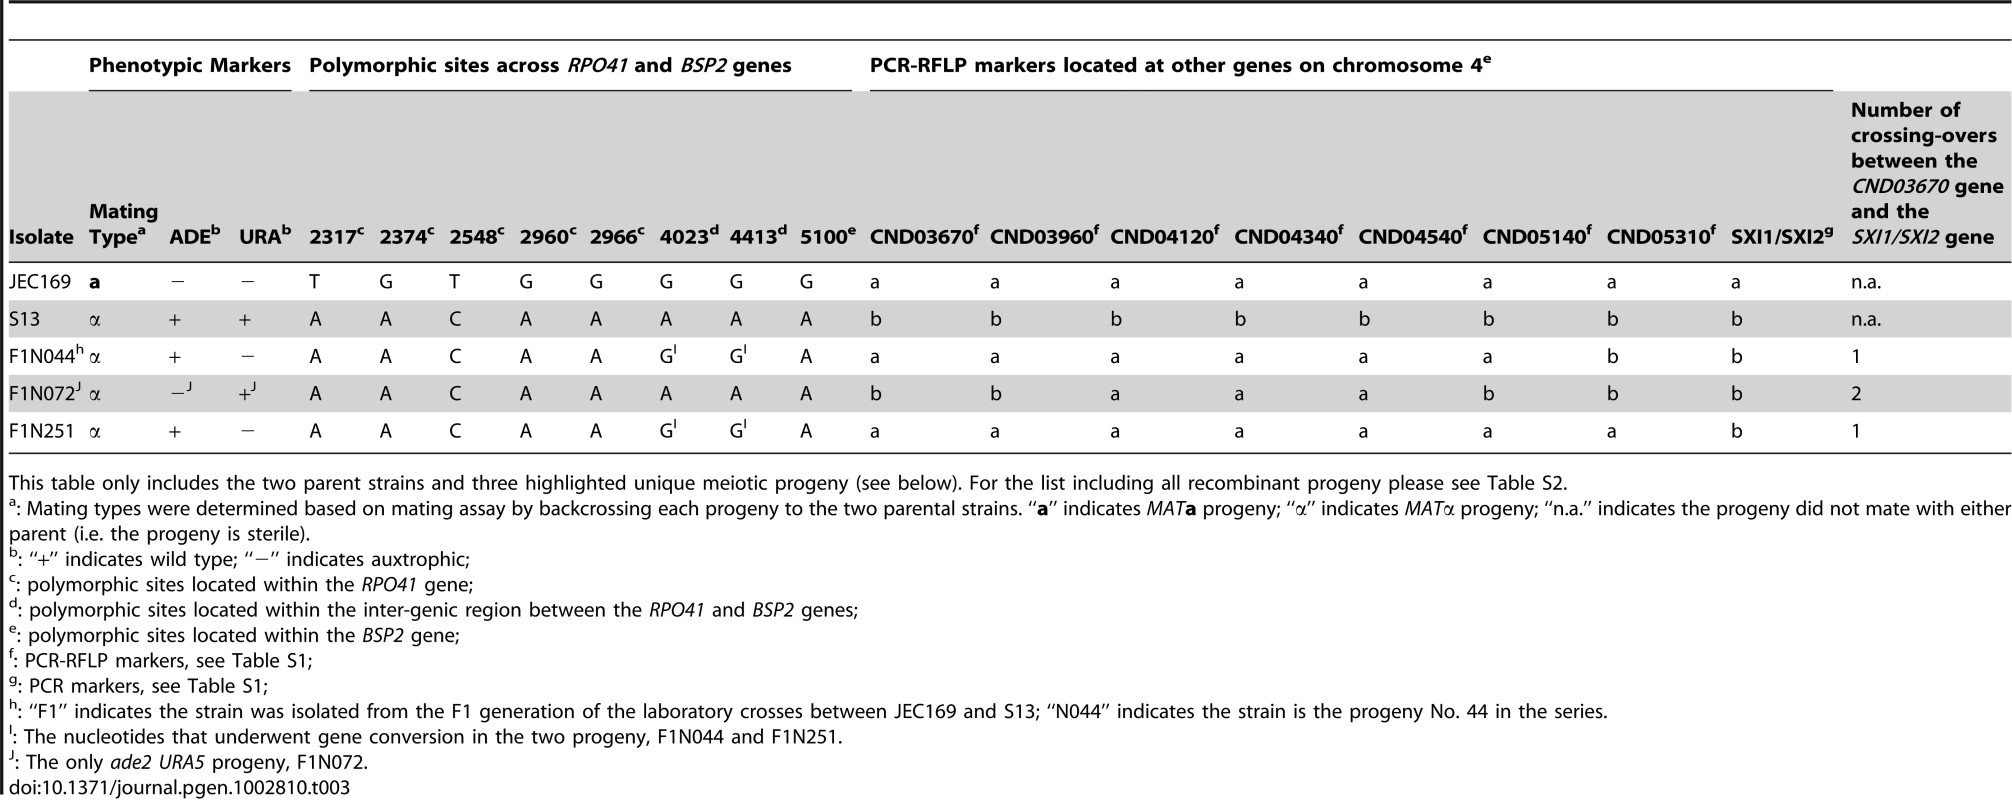 Genotypes of the two parental strains and representative recombinant progeny at the 18 markers screened in this study.